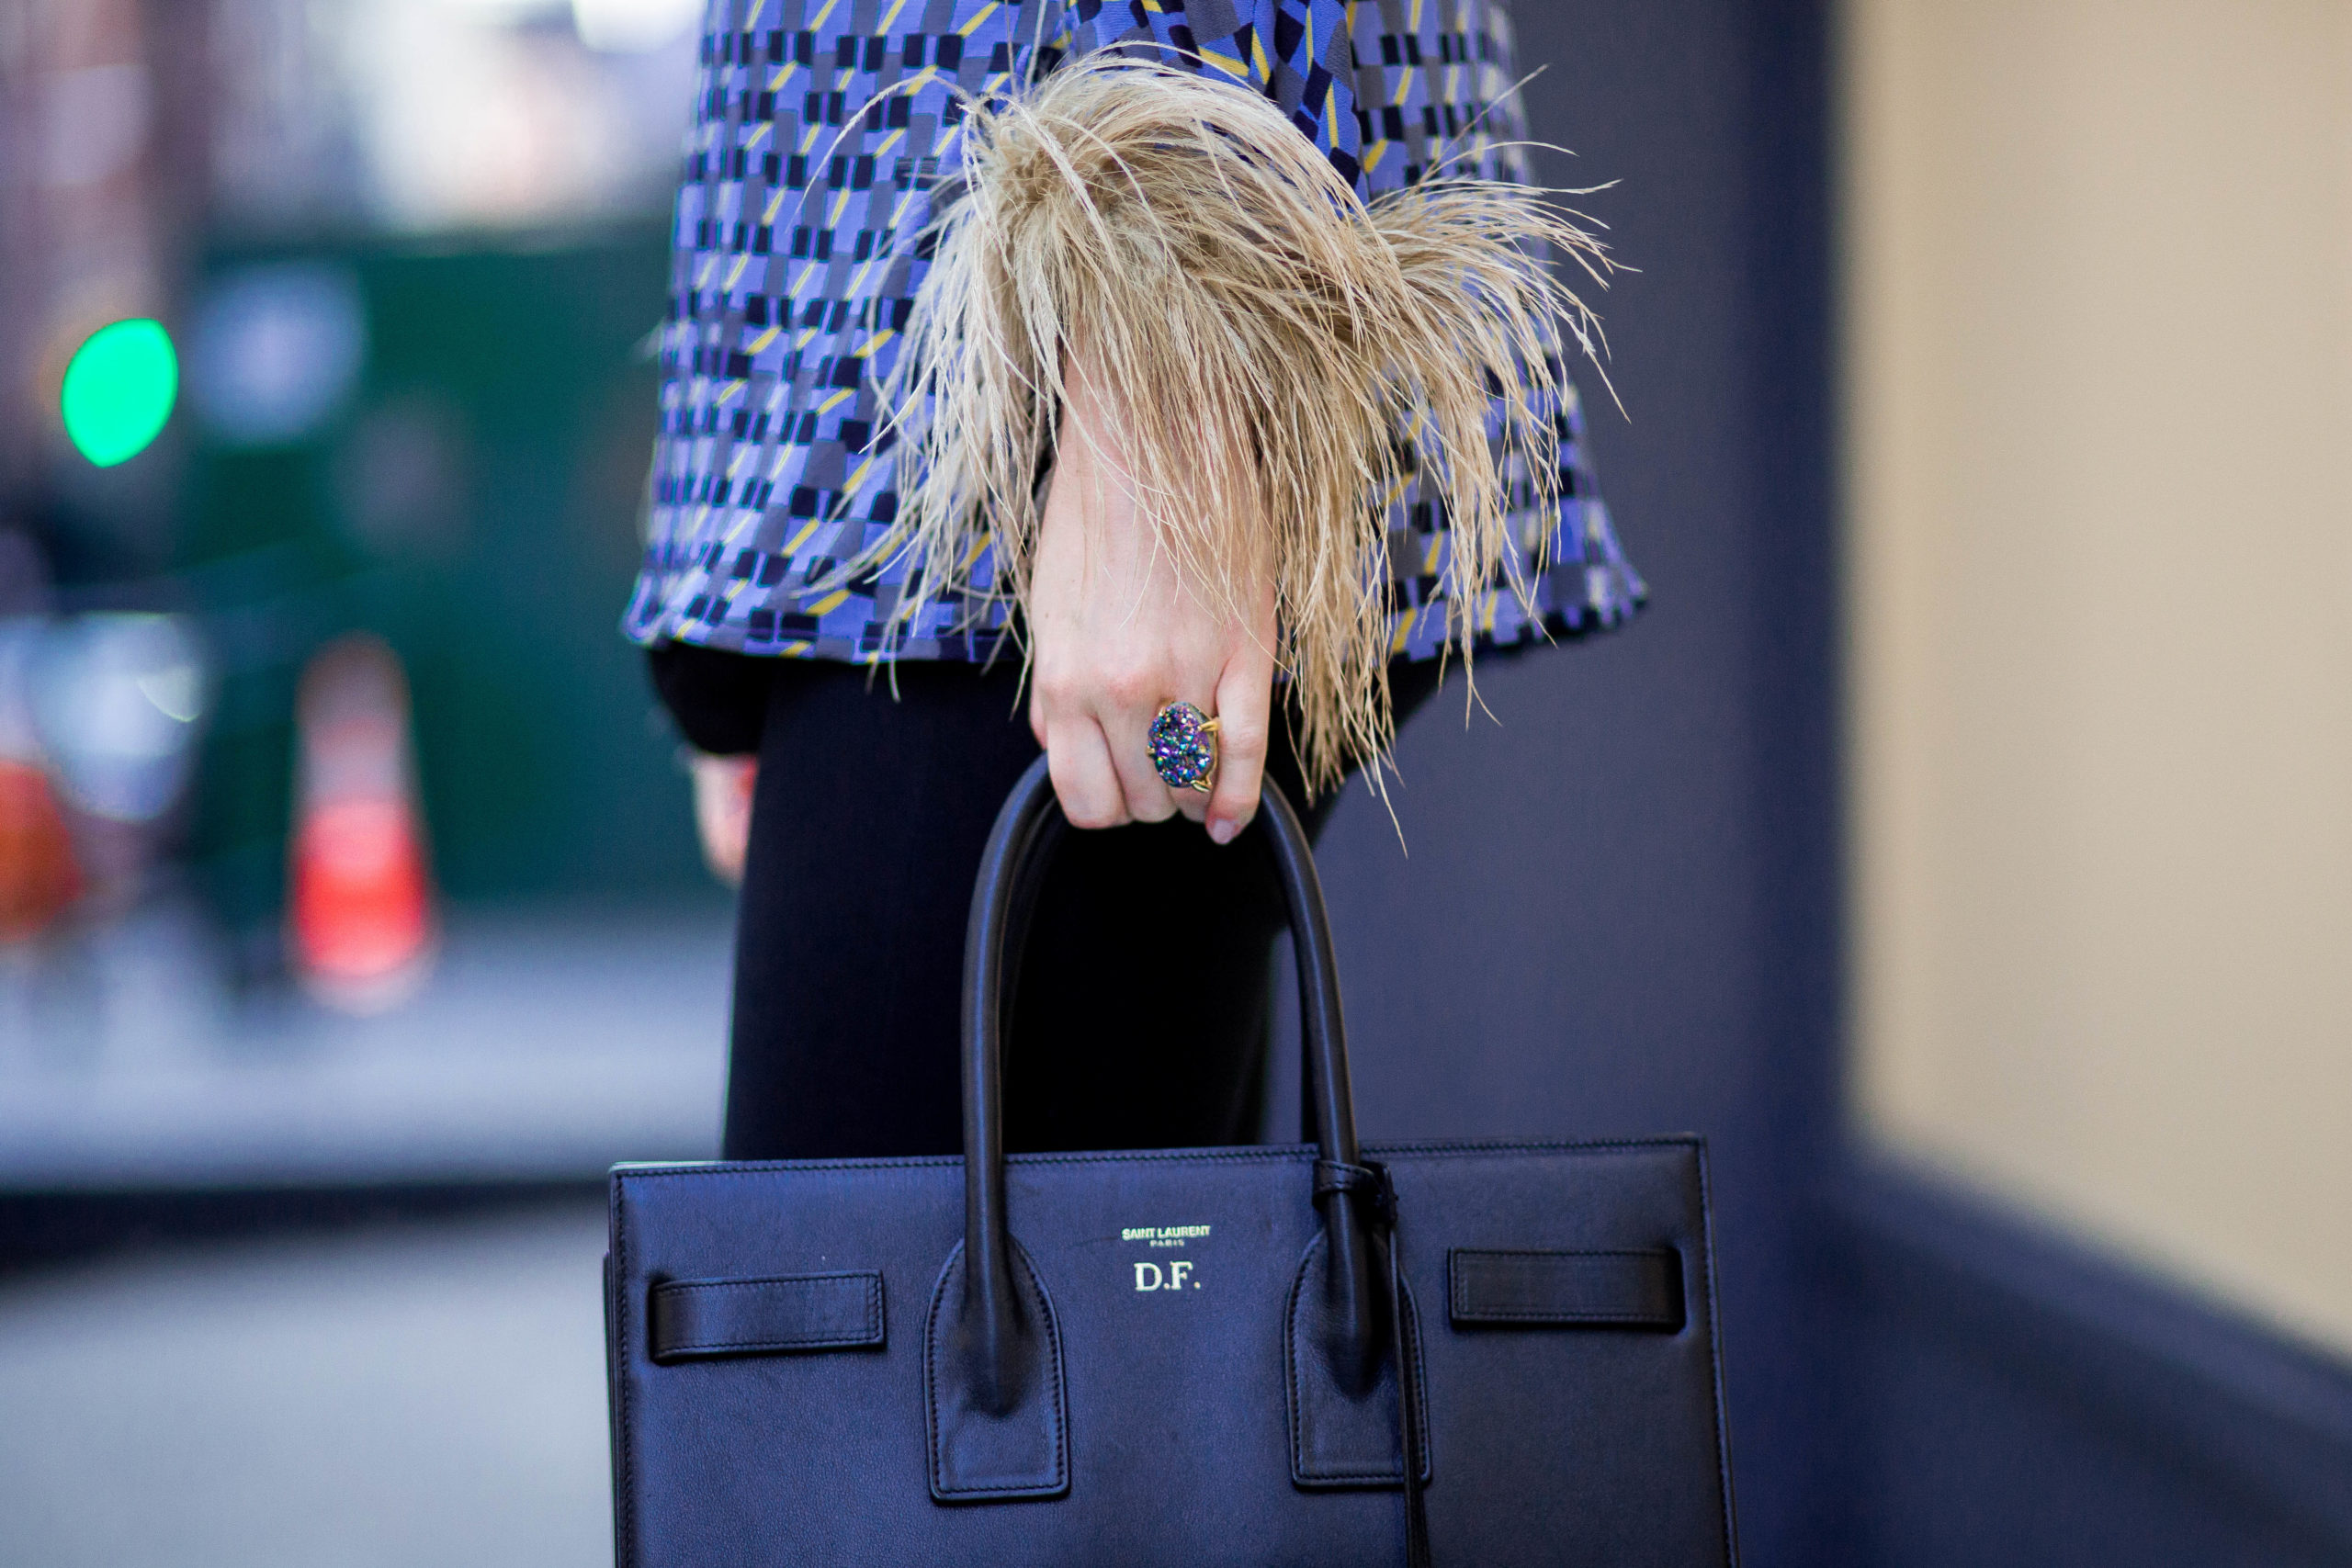 Photo of a woman crossing the street: she is wearing a blue, black & white top with feathers on the sleeve, a large cocktail ring, black pants & a black Yves Saint Laurent bag